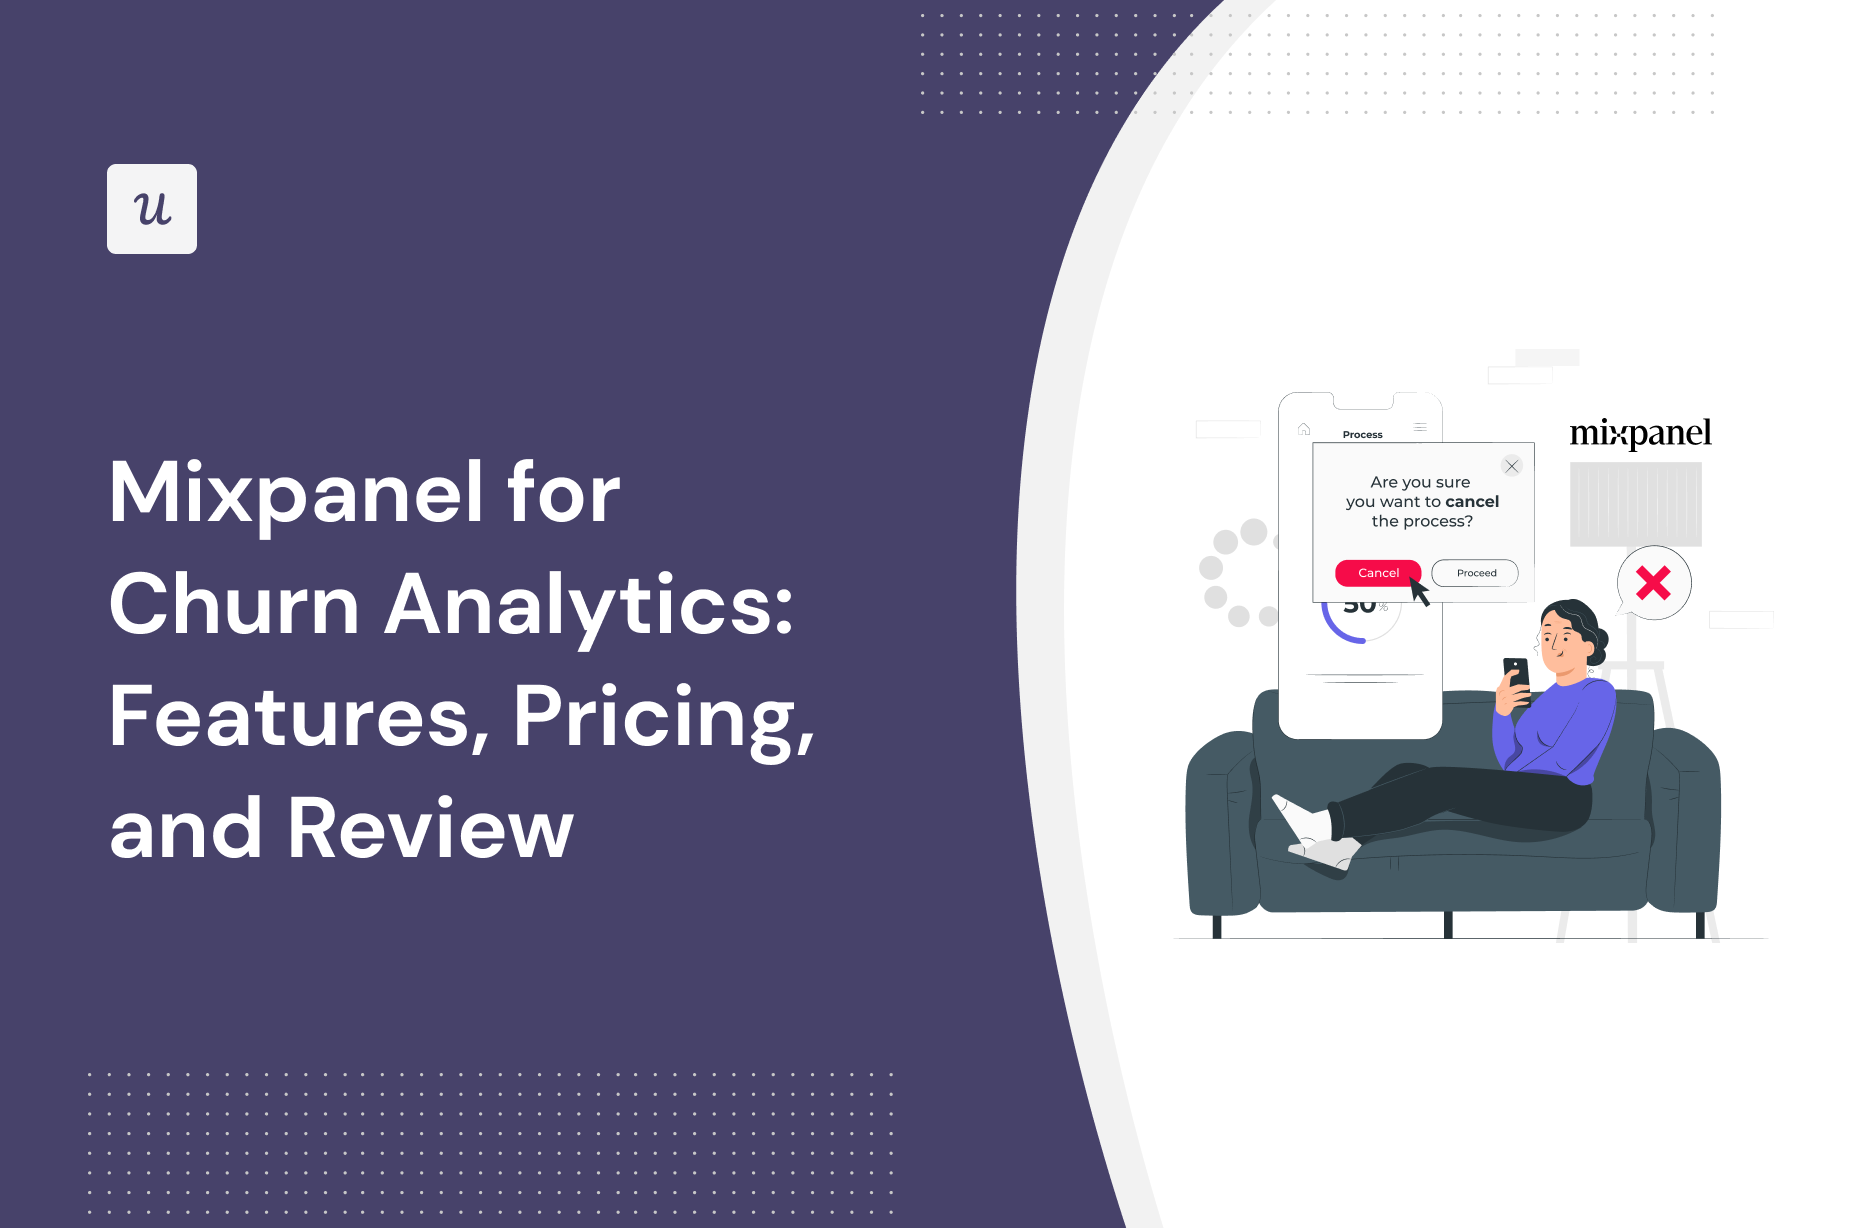 Mixpanel for Churn Analytics: Features, Pricing, and Review